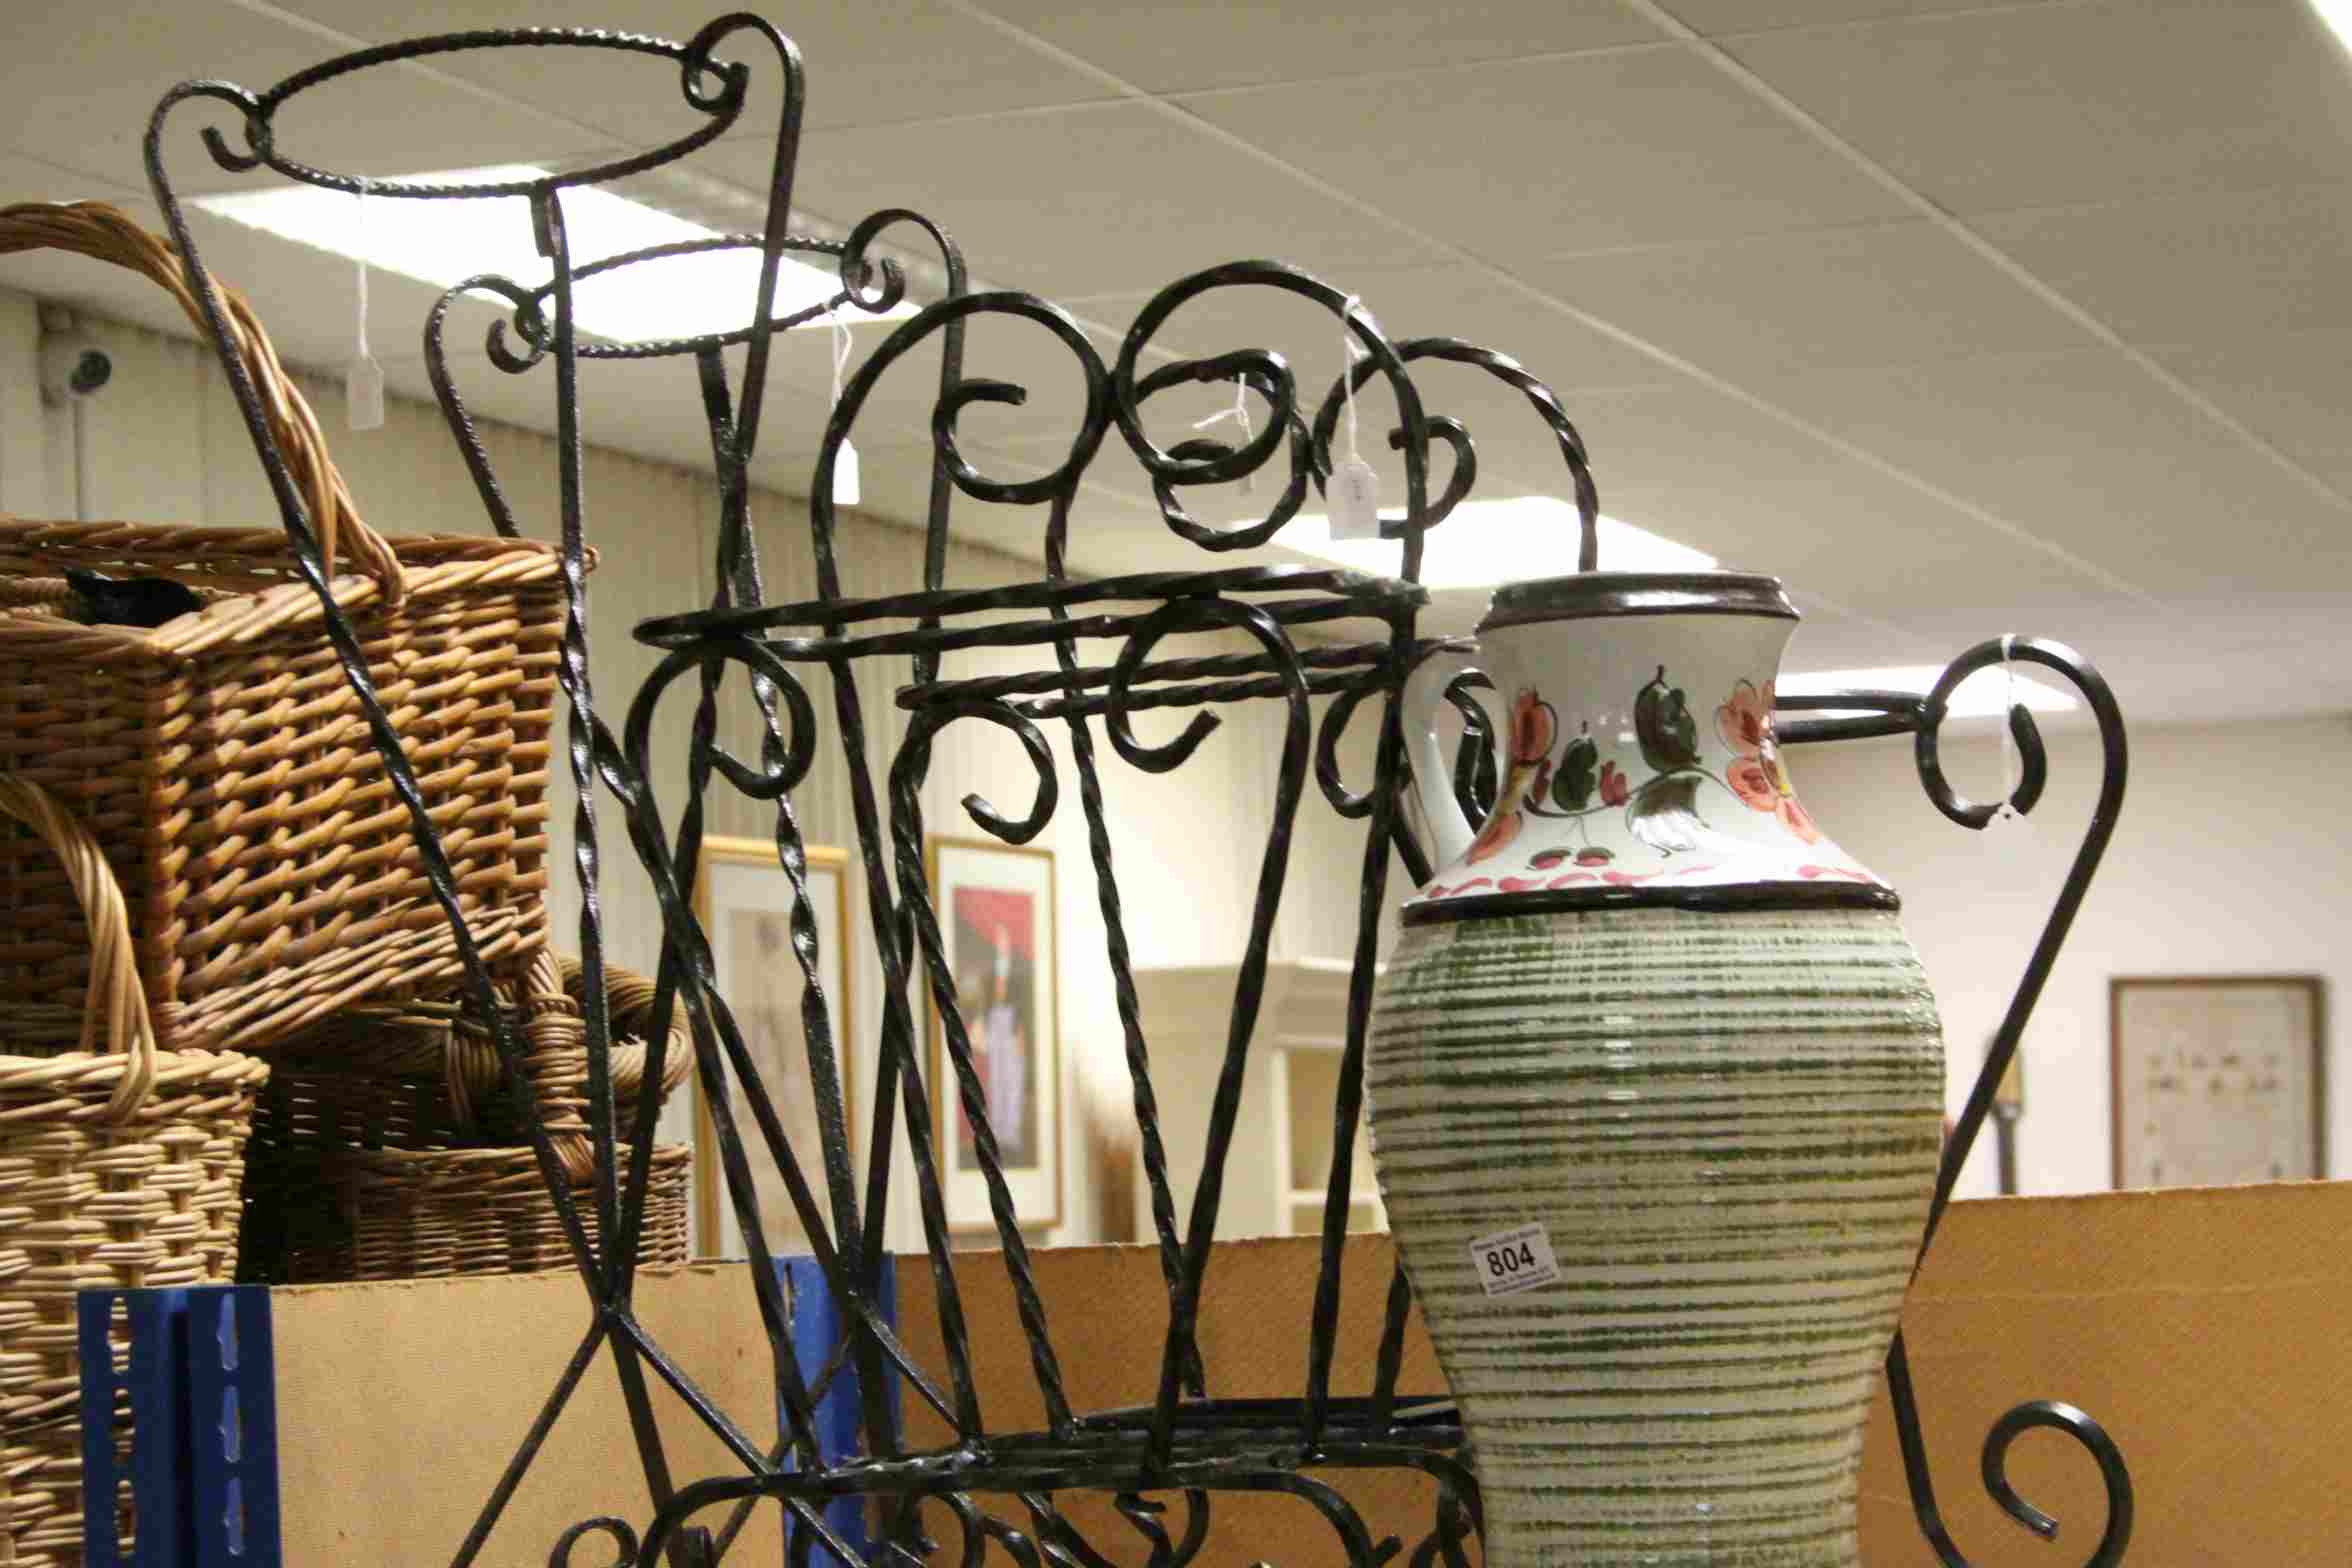 Pair of Wrought Iron Stick / Umbrella Stands, Pair of Wrought Iron Plant Pot Holders and a Ceramic - Image 2 of 2